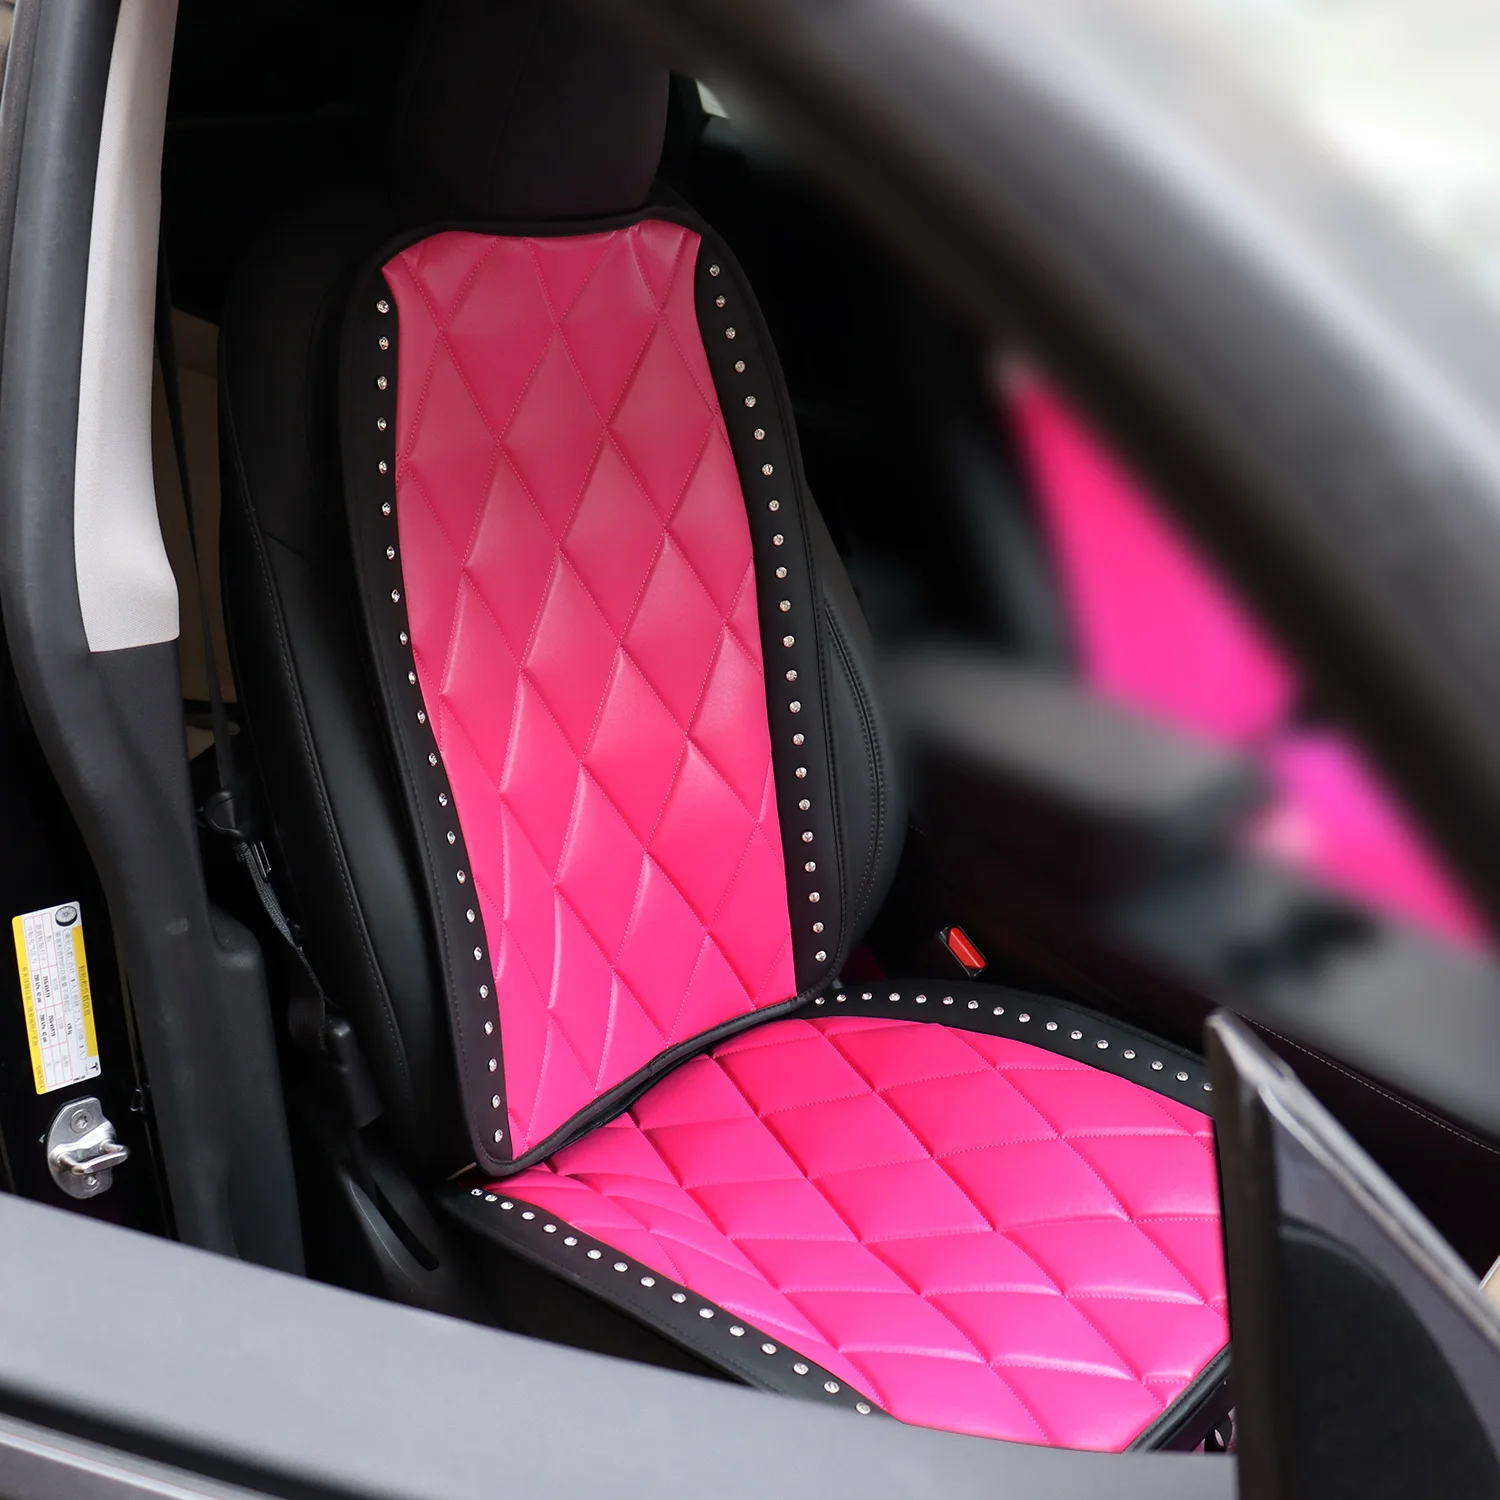 Hot Rose Pink Bling Car Accessories Interior Set for Women Girls Glitter  Plush Warm Automotive Seat Covers Cushion Crown Decor